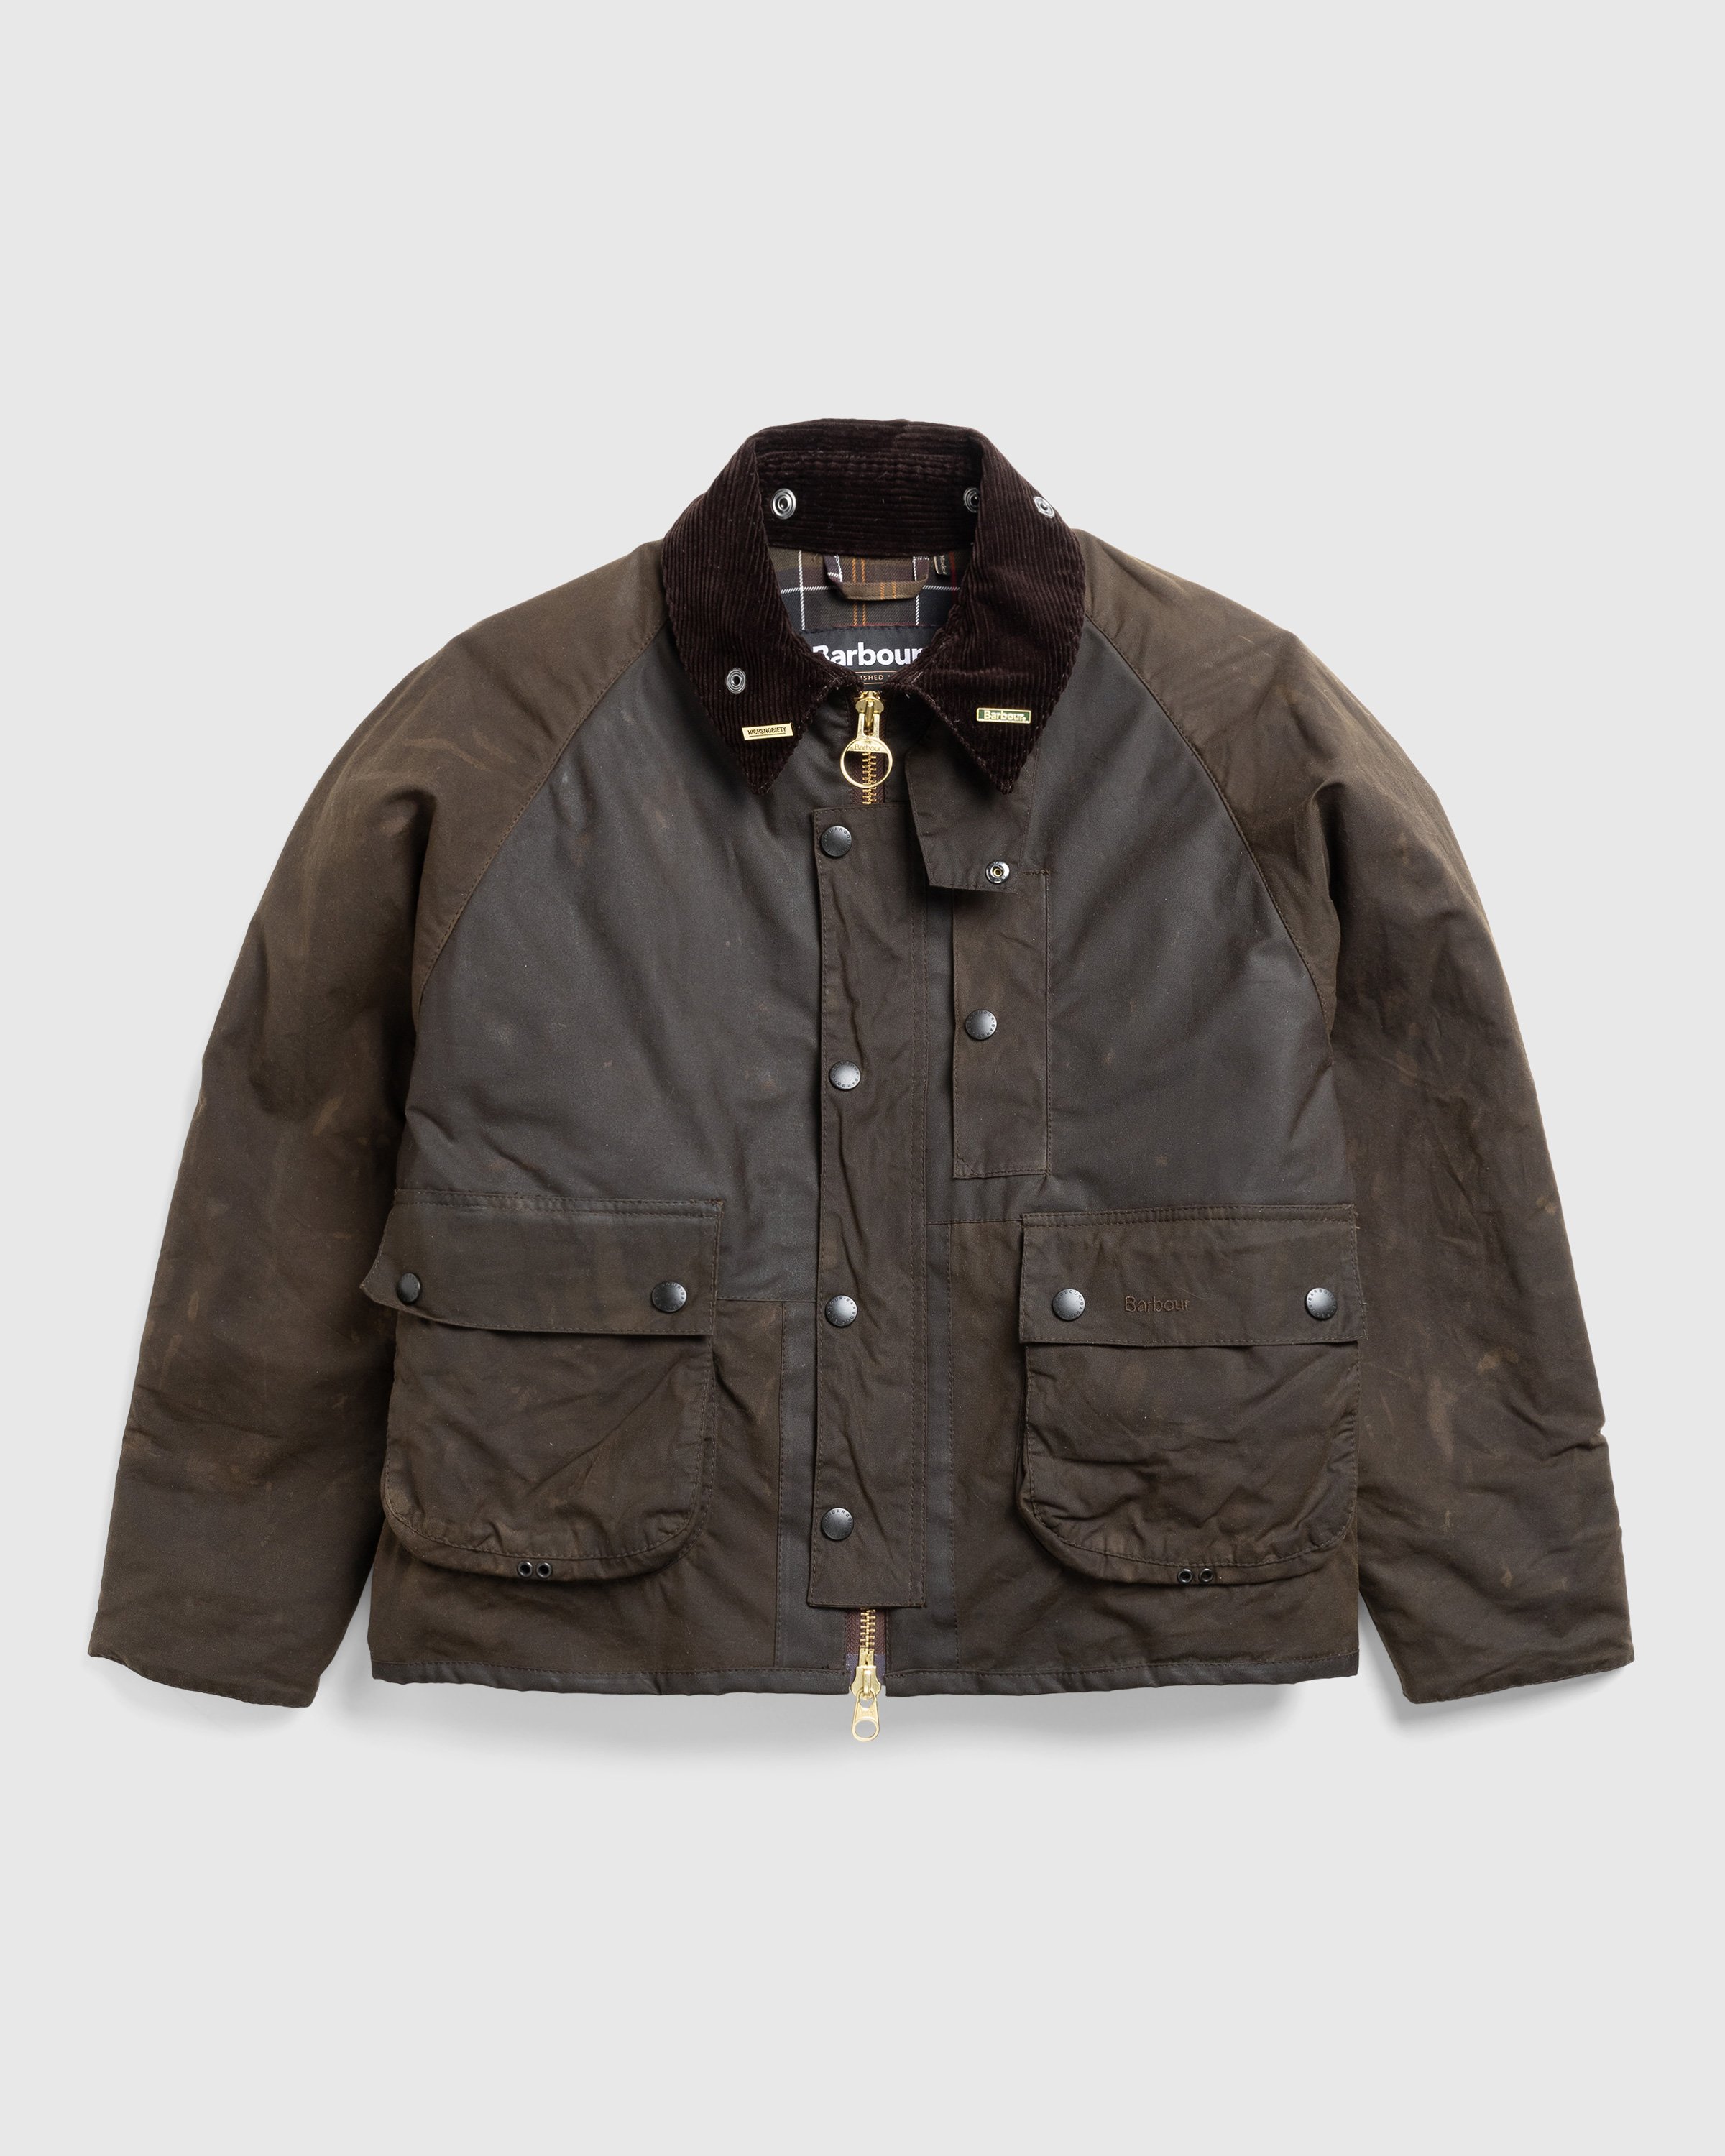 Barbour x Highsnobiety - Re-Loved Cropped Bedale Jacket 1 - 42 - Dark-Green - Clothing - Olive - Image 1